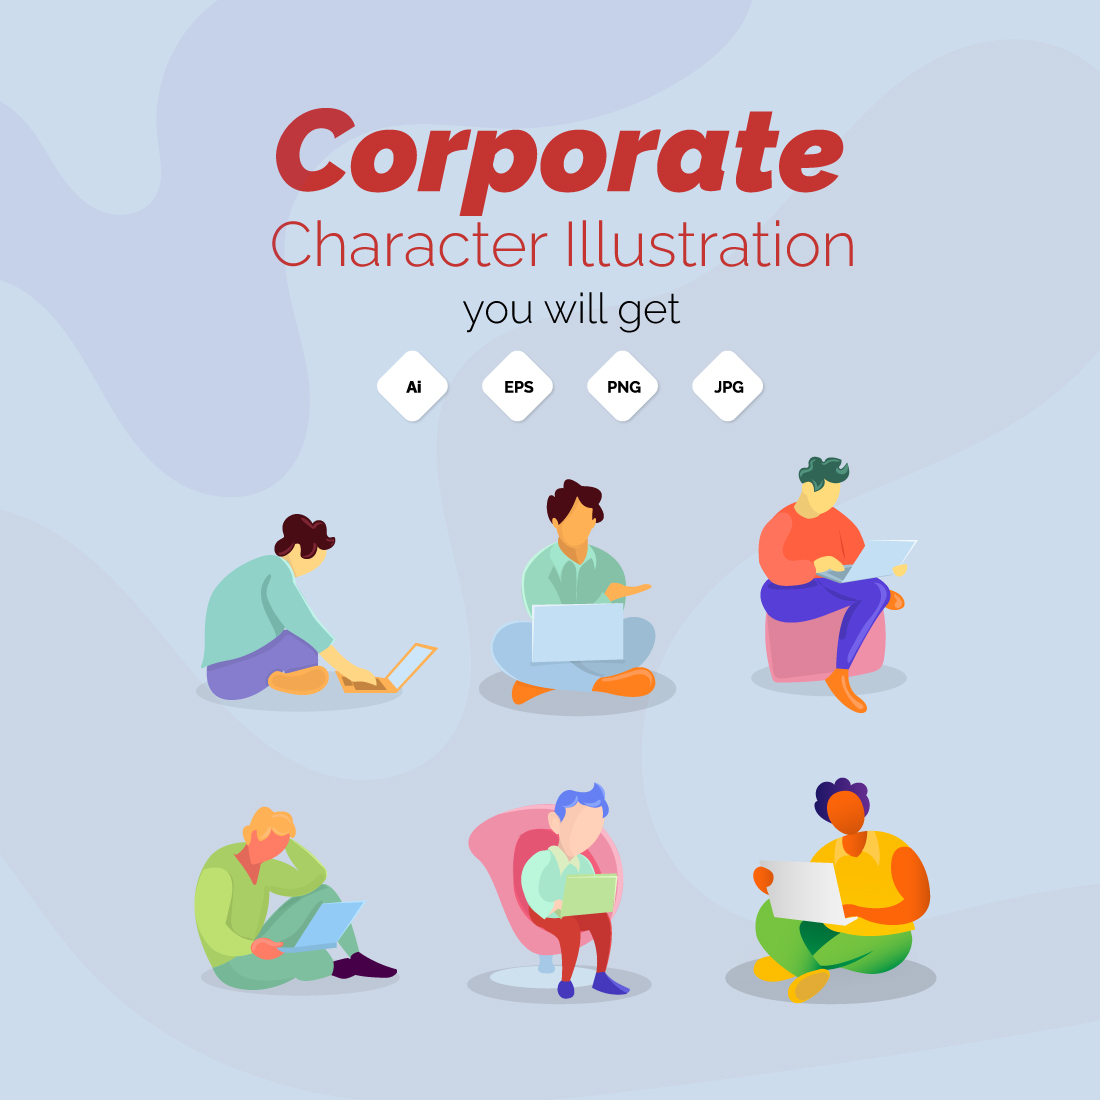 Corporate Character illustration pack cover image.